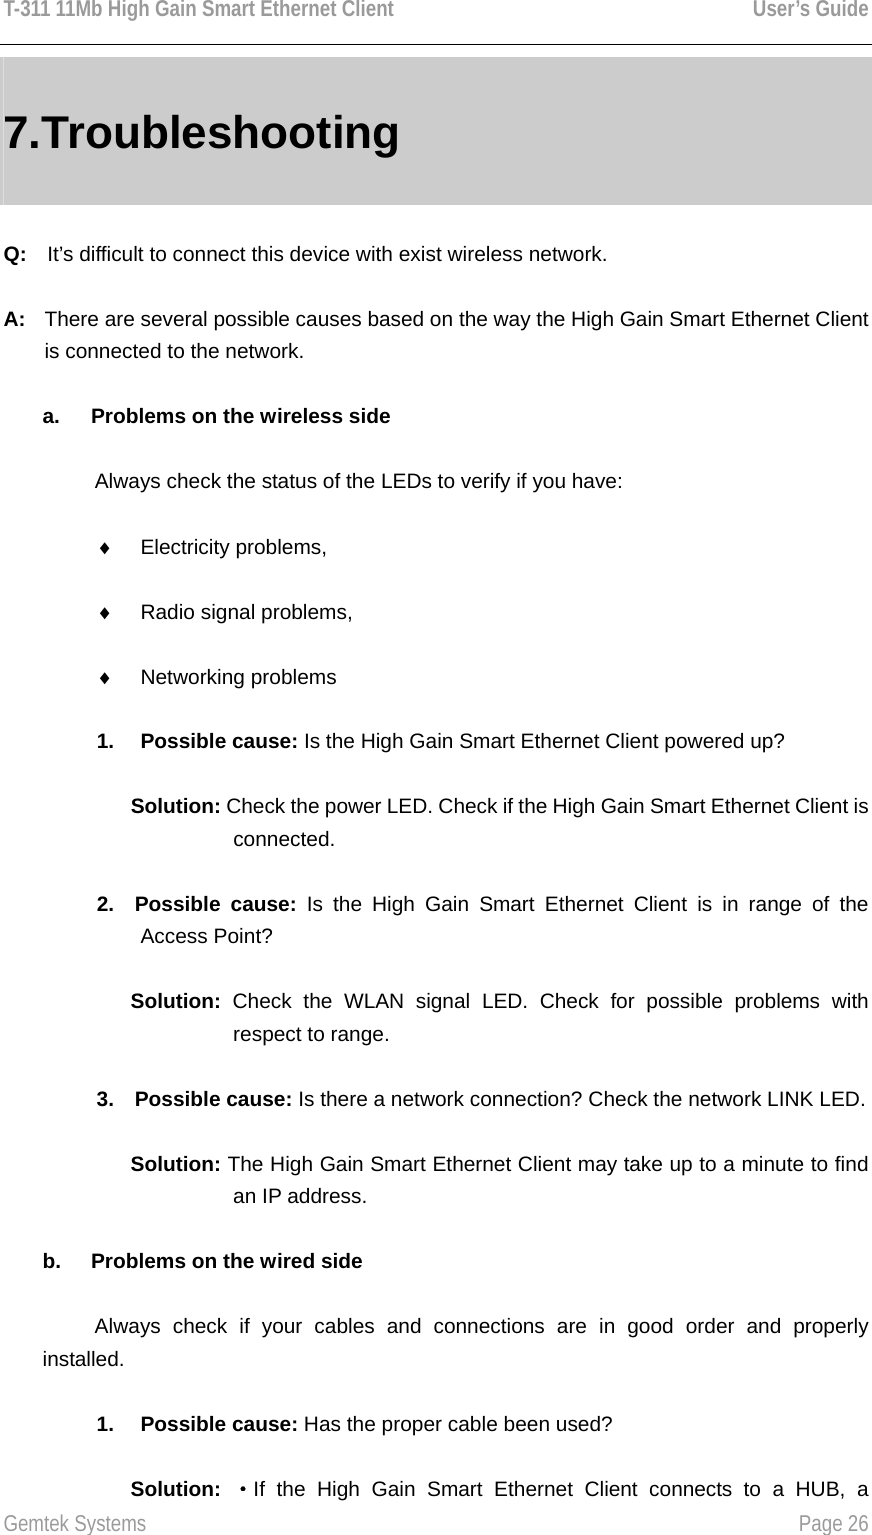 T-311 11Mb High Gain Smart Ethernet Client    User’s Guide  Gemtek Systems    Page 26  7.Troubleshooting Q:  It’s difficult to connect this device with exist wireless network. A:  There are several possible causes based on the way the High Gain Smart Ethernet Client is connected to the network. a.  Problems on the wireless side Always check the status of the LEDs to verify if you have: ♦  Electricity problems, ♦  Radio signal problems, ♦  Networking problems 1. Possible cause: Is the High Gain Smart Ethernet Client powered up? Solution: Check the power LED. Check if the High Gain Smart Ethernet Client is connected. 2. Possible cause: Is the High Gain Smart Ethernet Client is in range of the Access Point? Solution: Check the WLAN signal LED. Check for possible problems with respect to range. 3. Possible cause: Is there a network connection? Check the network LINK LED. Solution: The High Gain Smart Ethernet Client may take up to a minute to find an IP address. b.  Problems on the wired side Always check if your cables and connections are in good order and properly installed. 1. Possible cause: Has the proper cable been used? Solution:  ·If the High Gain Smart Ethernet Client connects to a HUB, a 